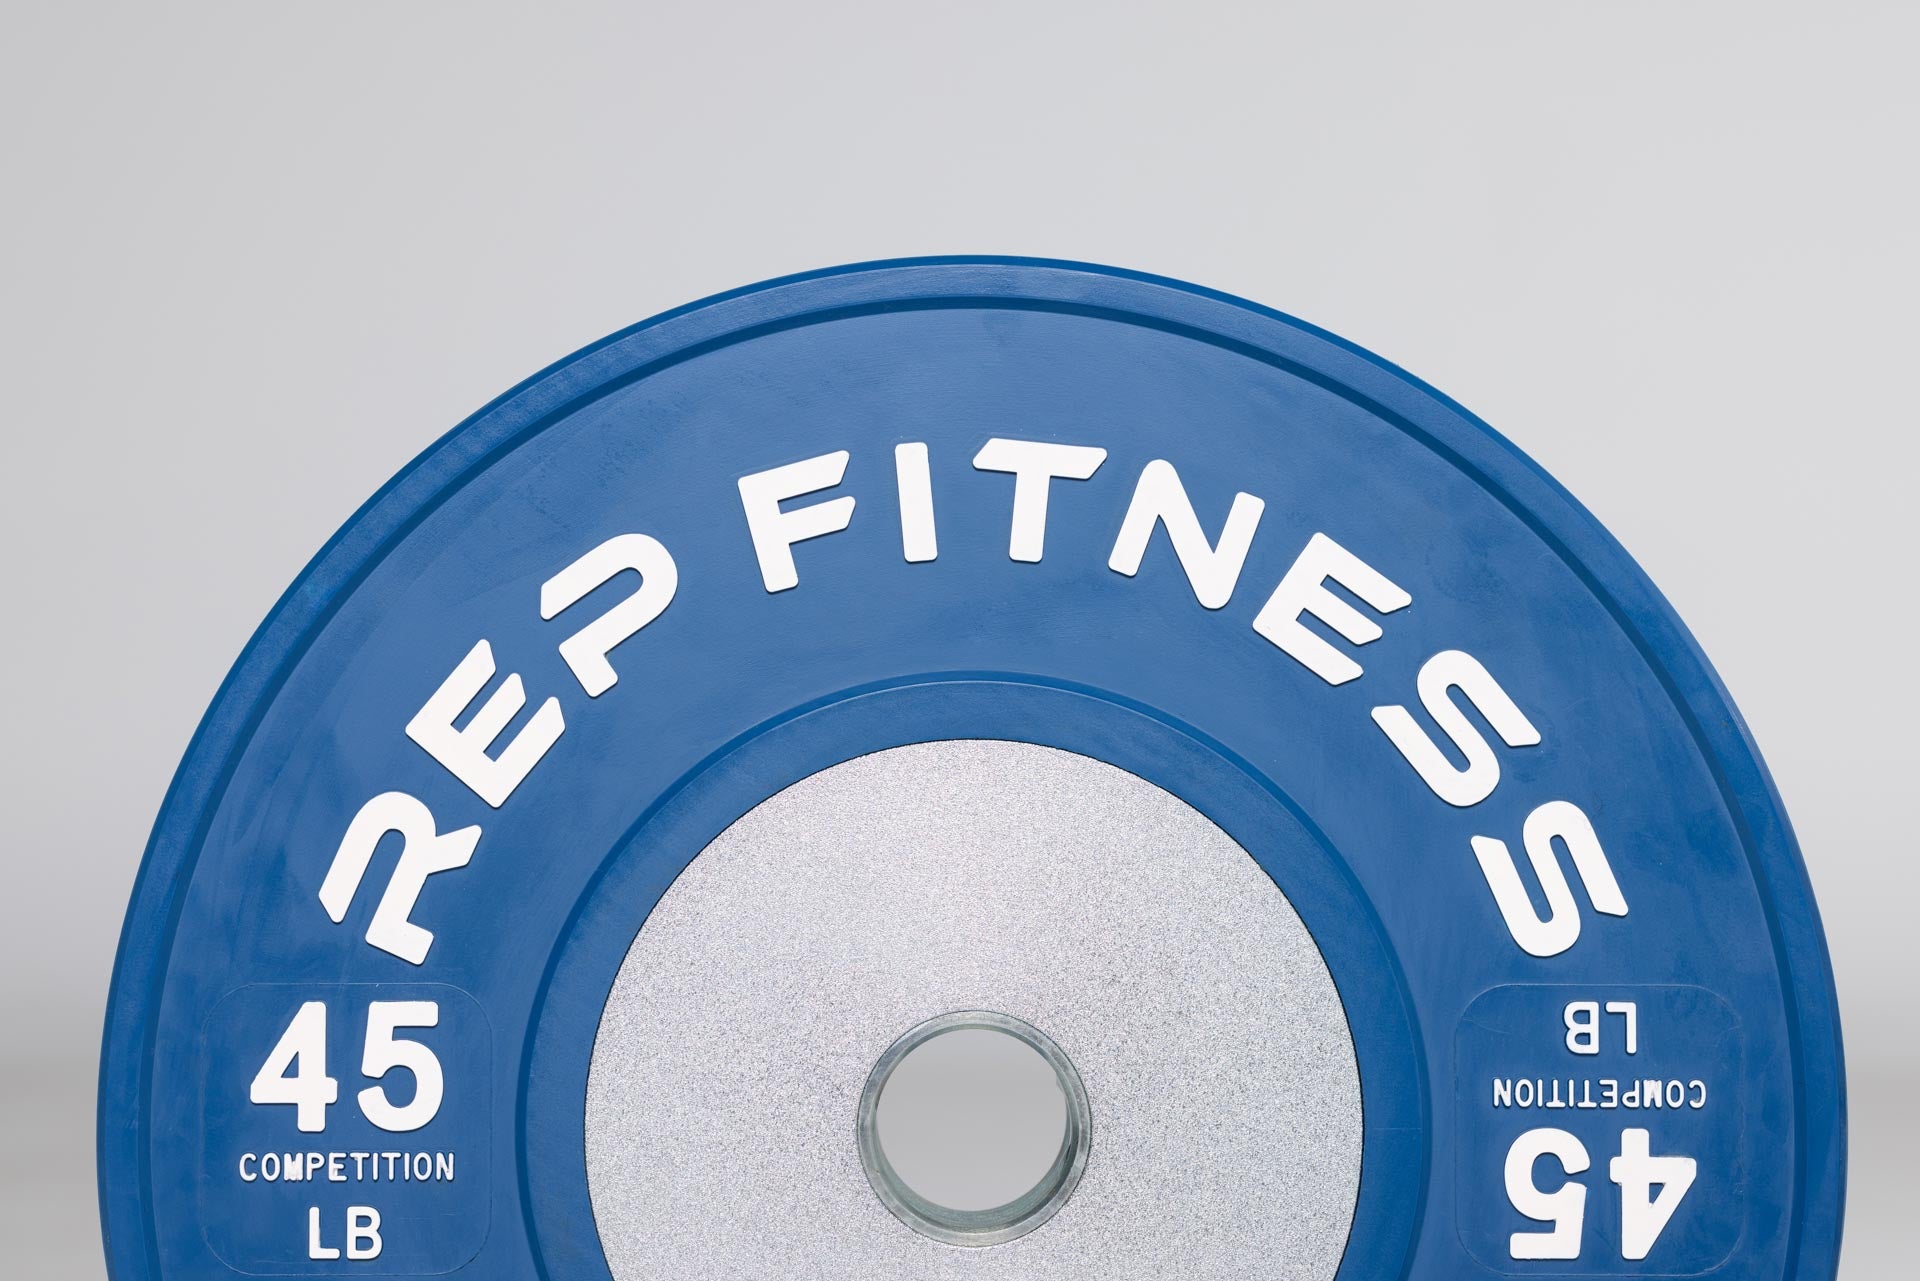 Close-up view of half of a blue 45lb competition bumper plate showing zinc-coated steel disc insert and raised white 